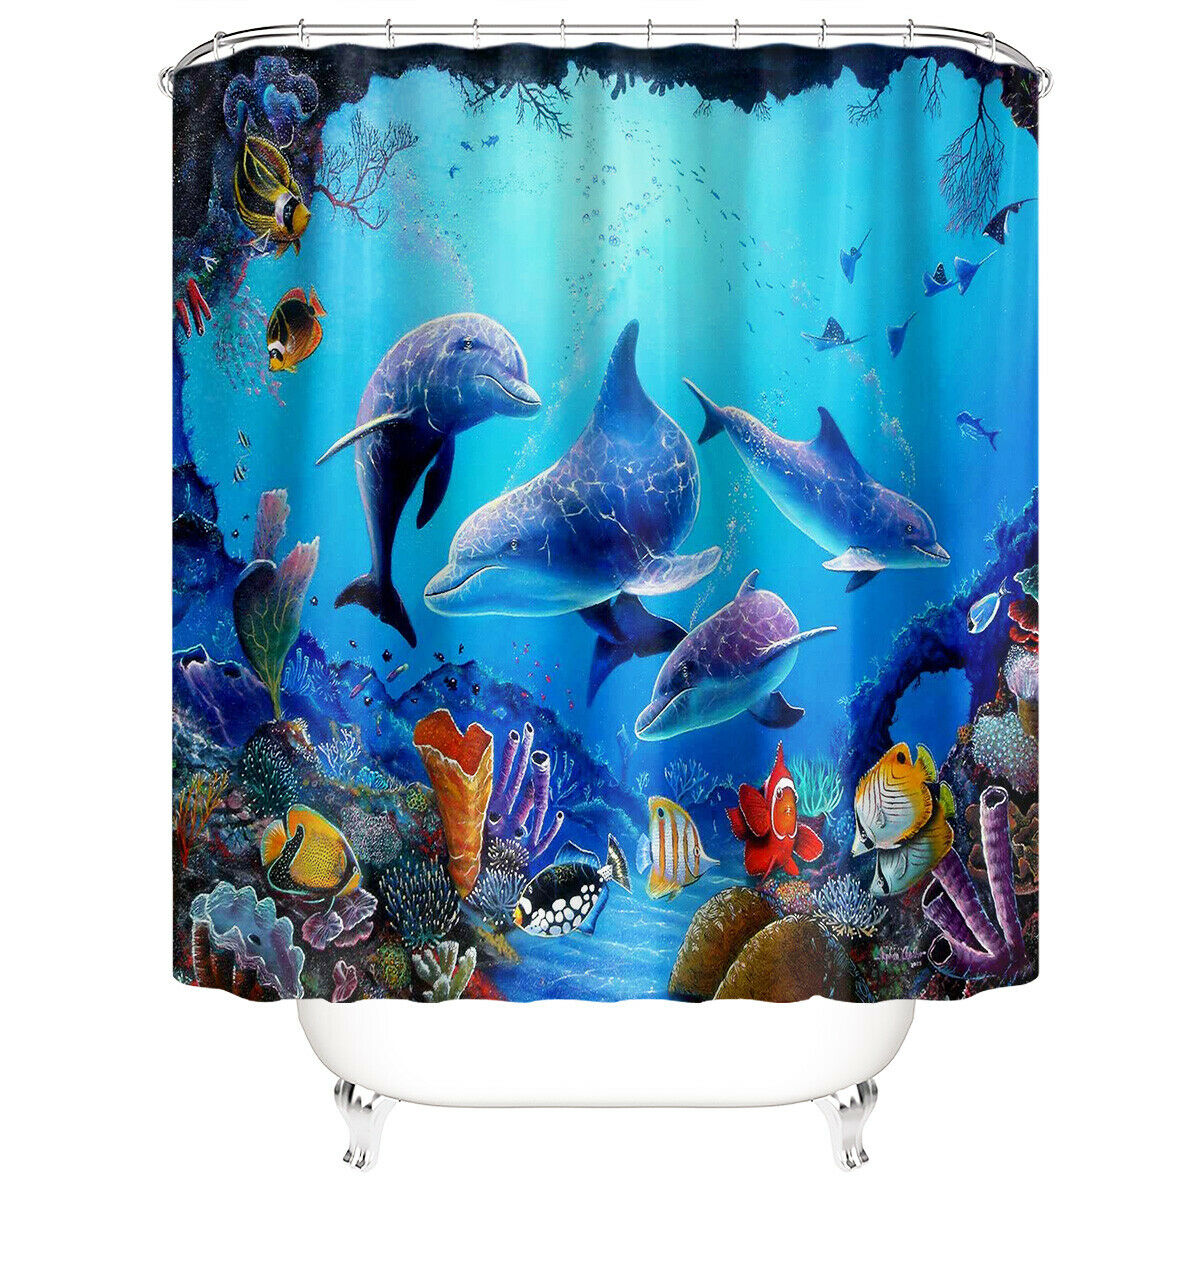 Dolphin Shower Curtain Bathroom Rug Set Bath Mat Non-Slip Toilet Lid Cover-180×180cm Shower Curtain Only-Free Shipping at meselling99